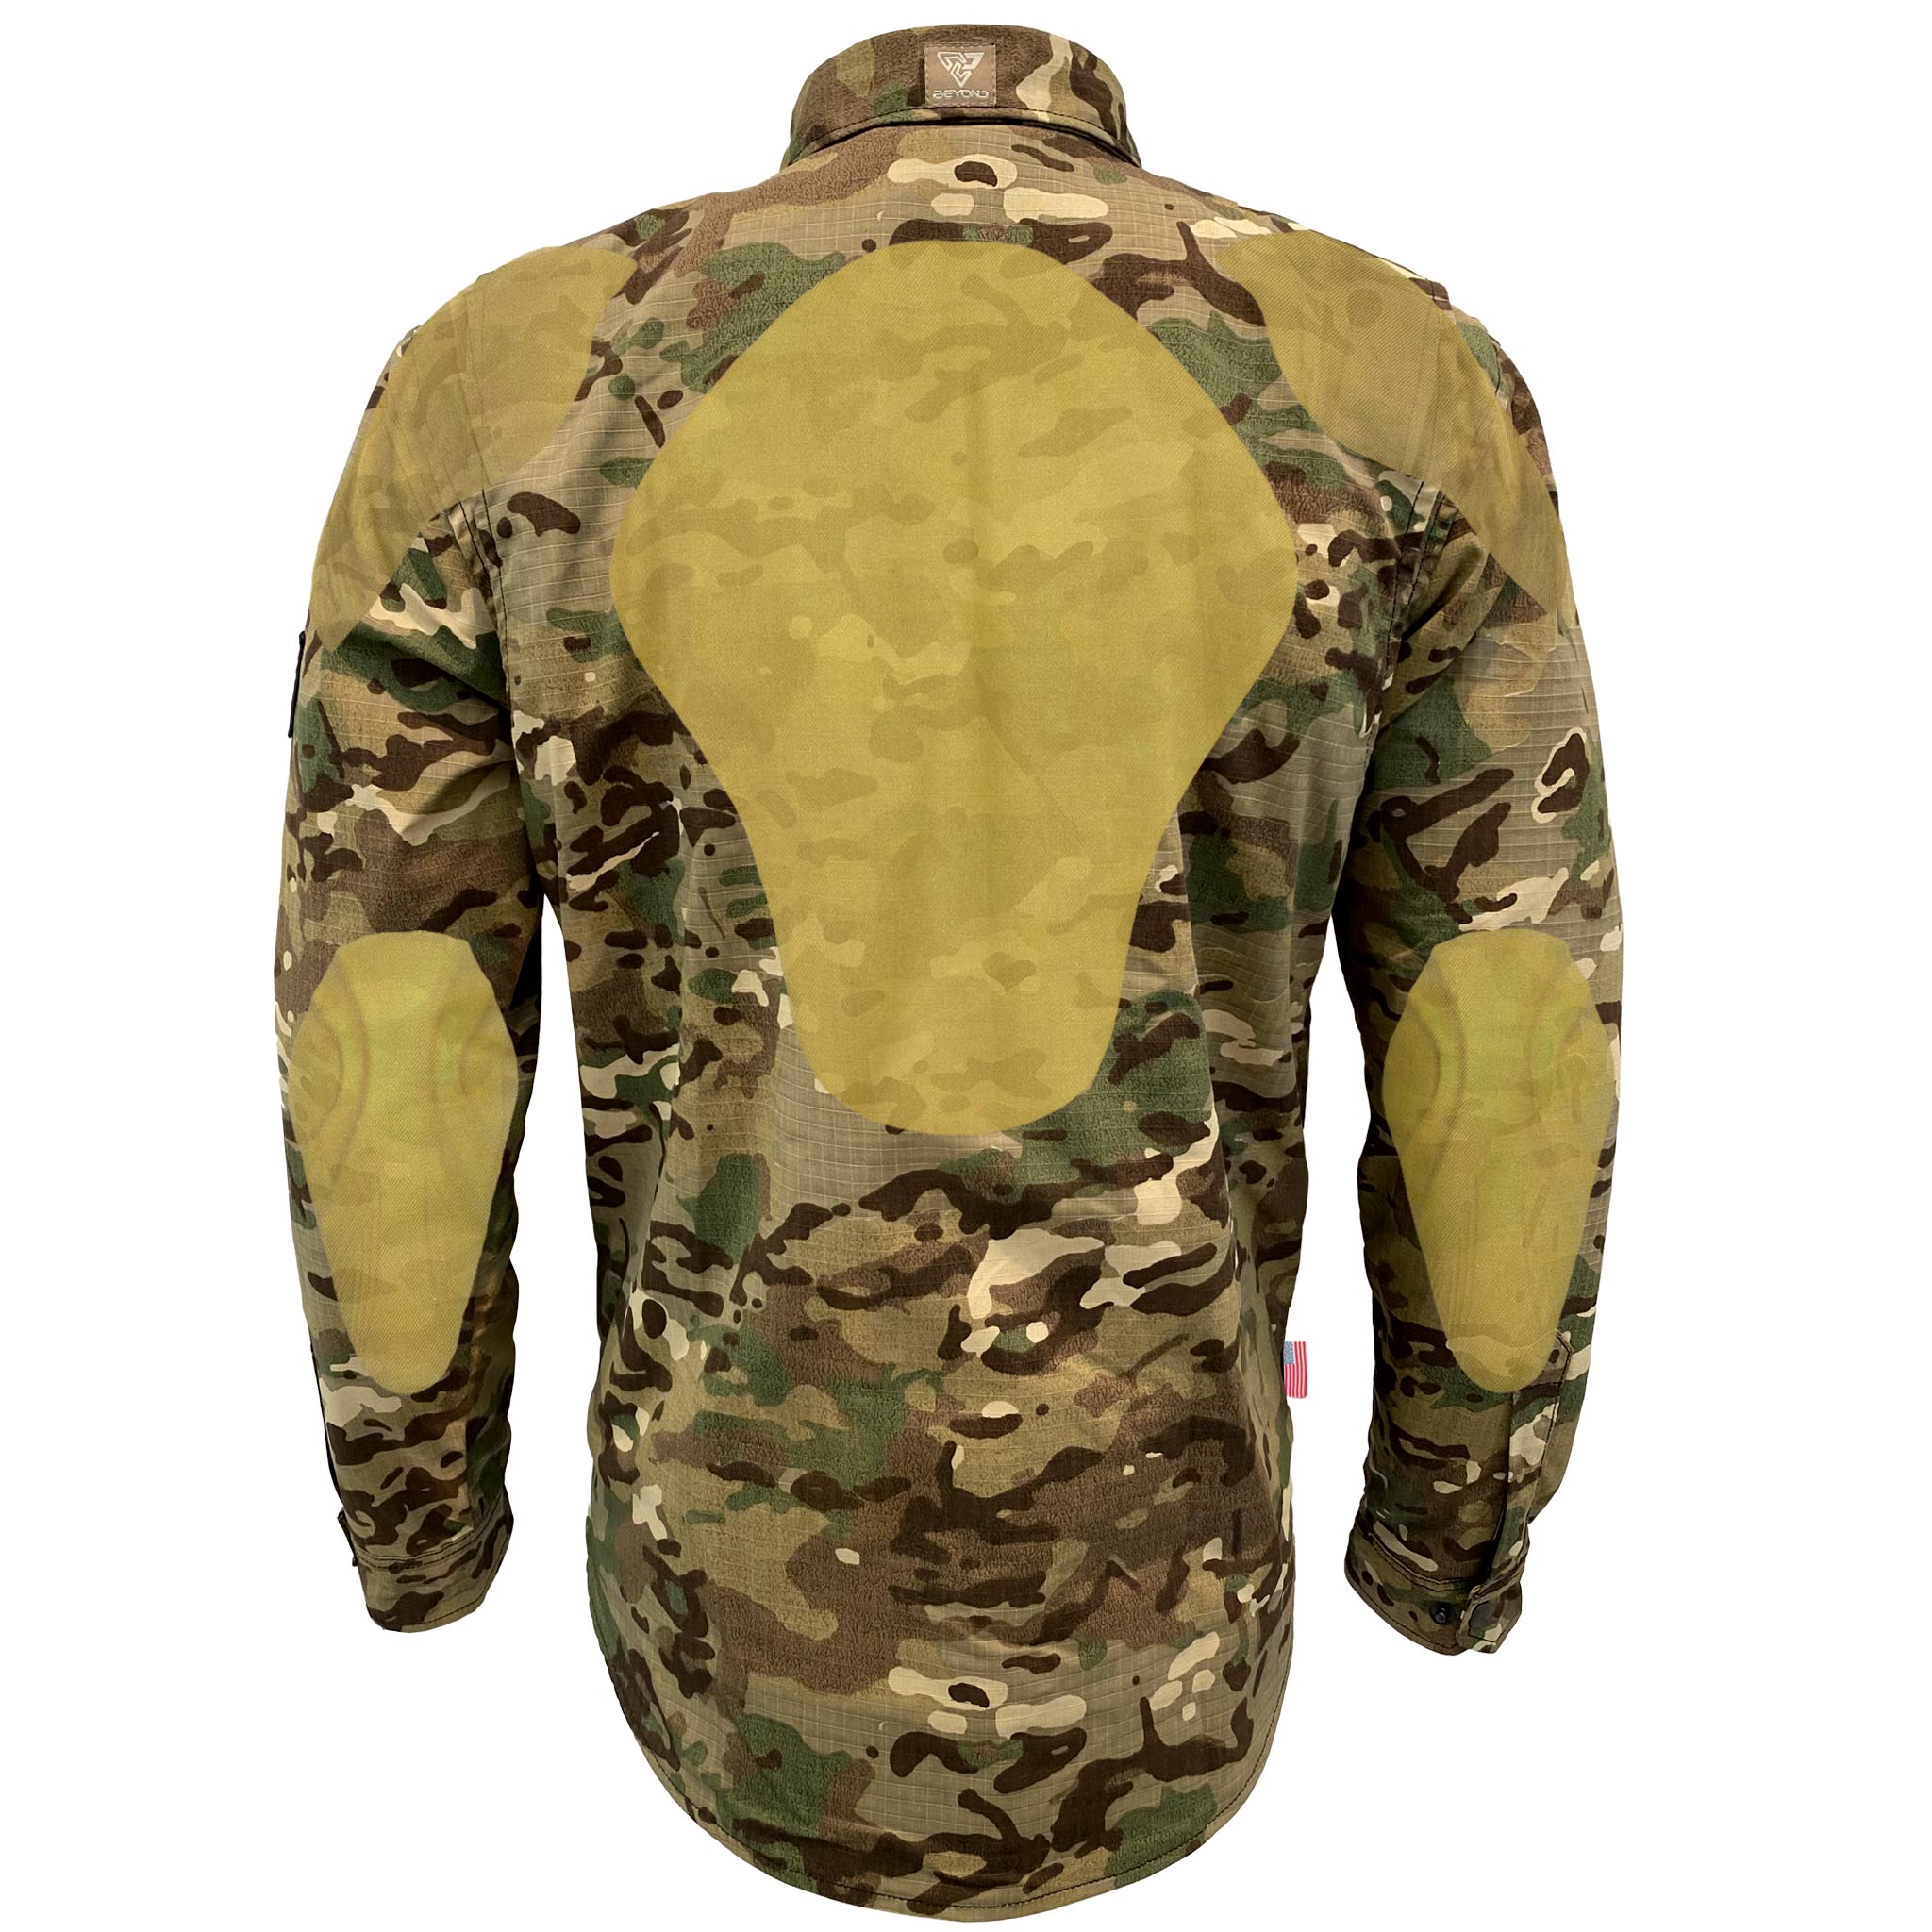 Protective Camouflage Shirt "Delta Four" - Light Color